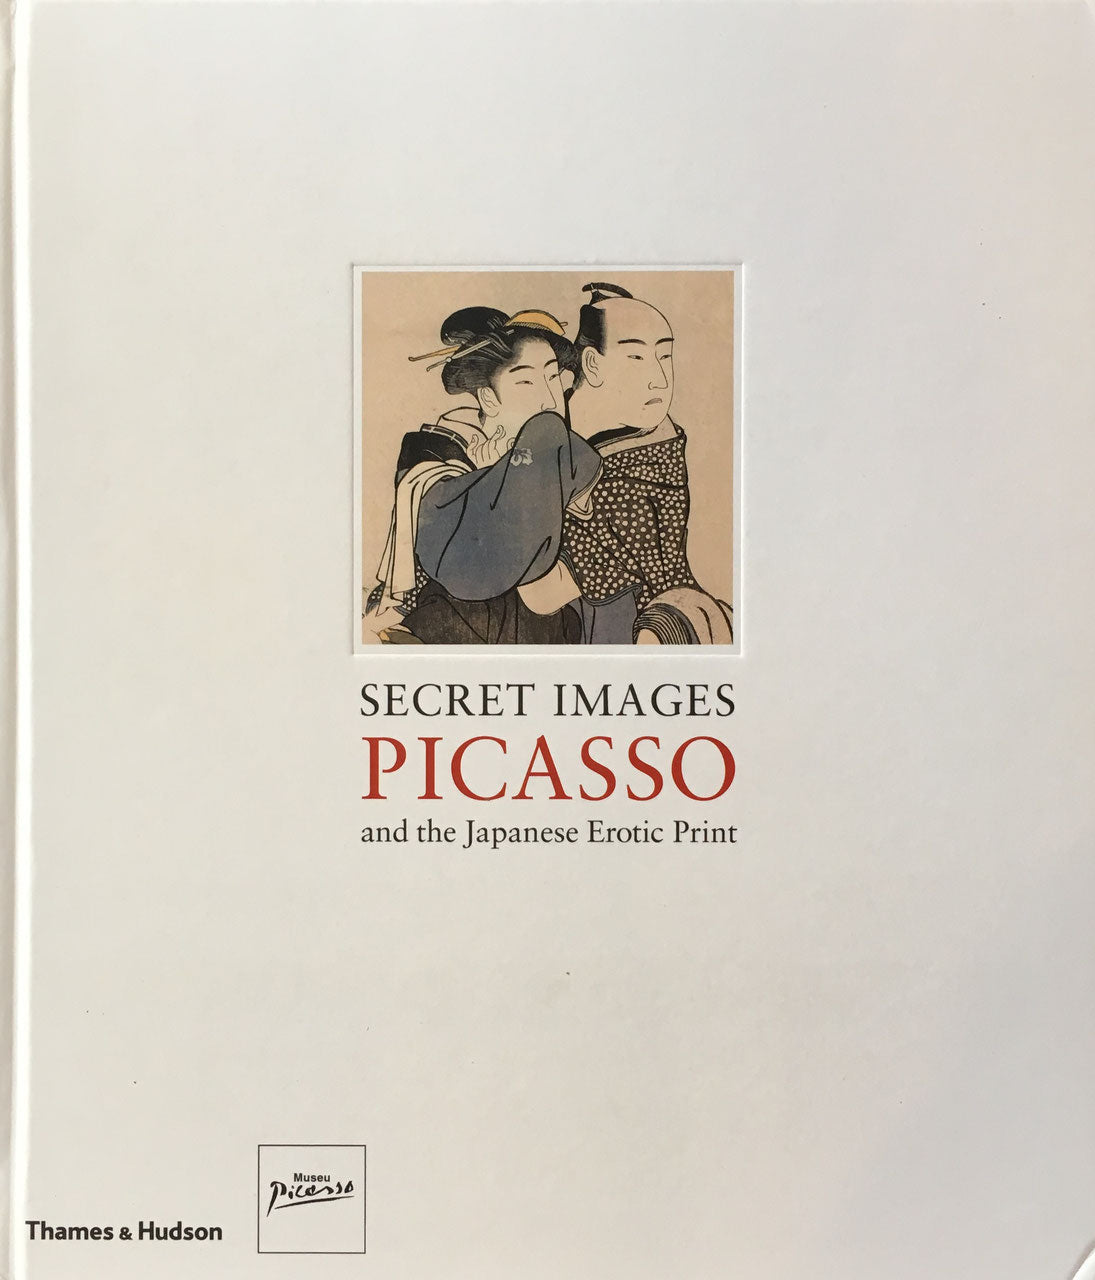 Secret Images Picasso and the Japanese Erotic Print